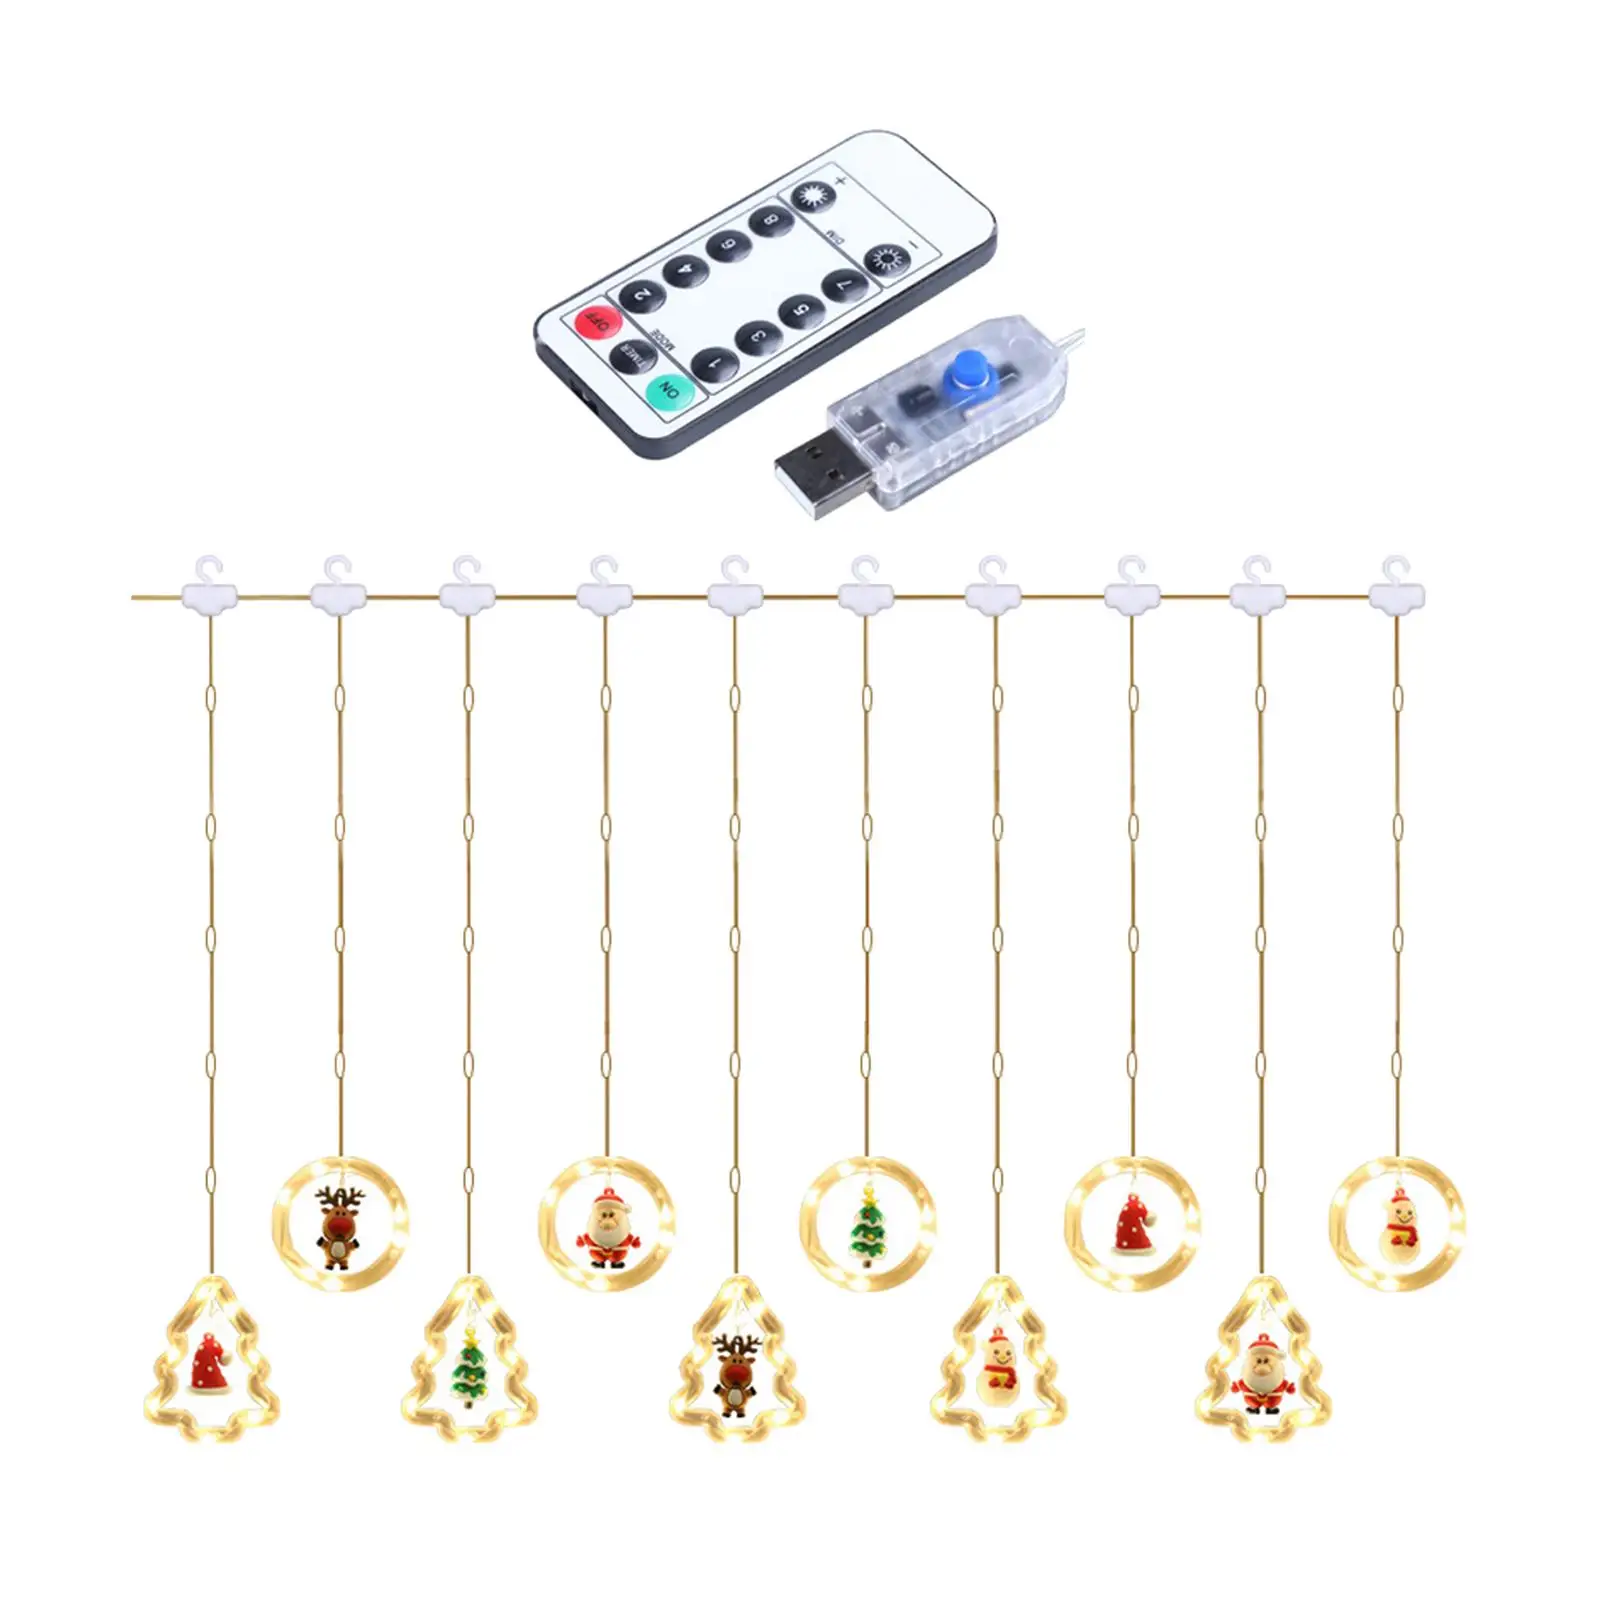 LED Christmas String Light Lighting Remote Control Lamp Hanging Ornament for Outdoor Home Garden Decoration